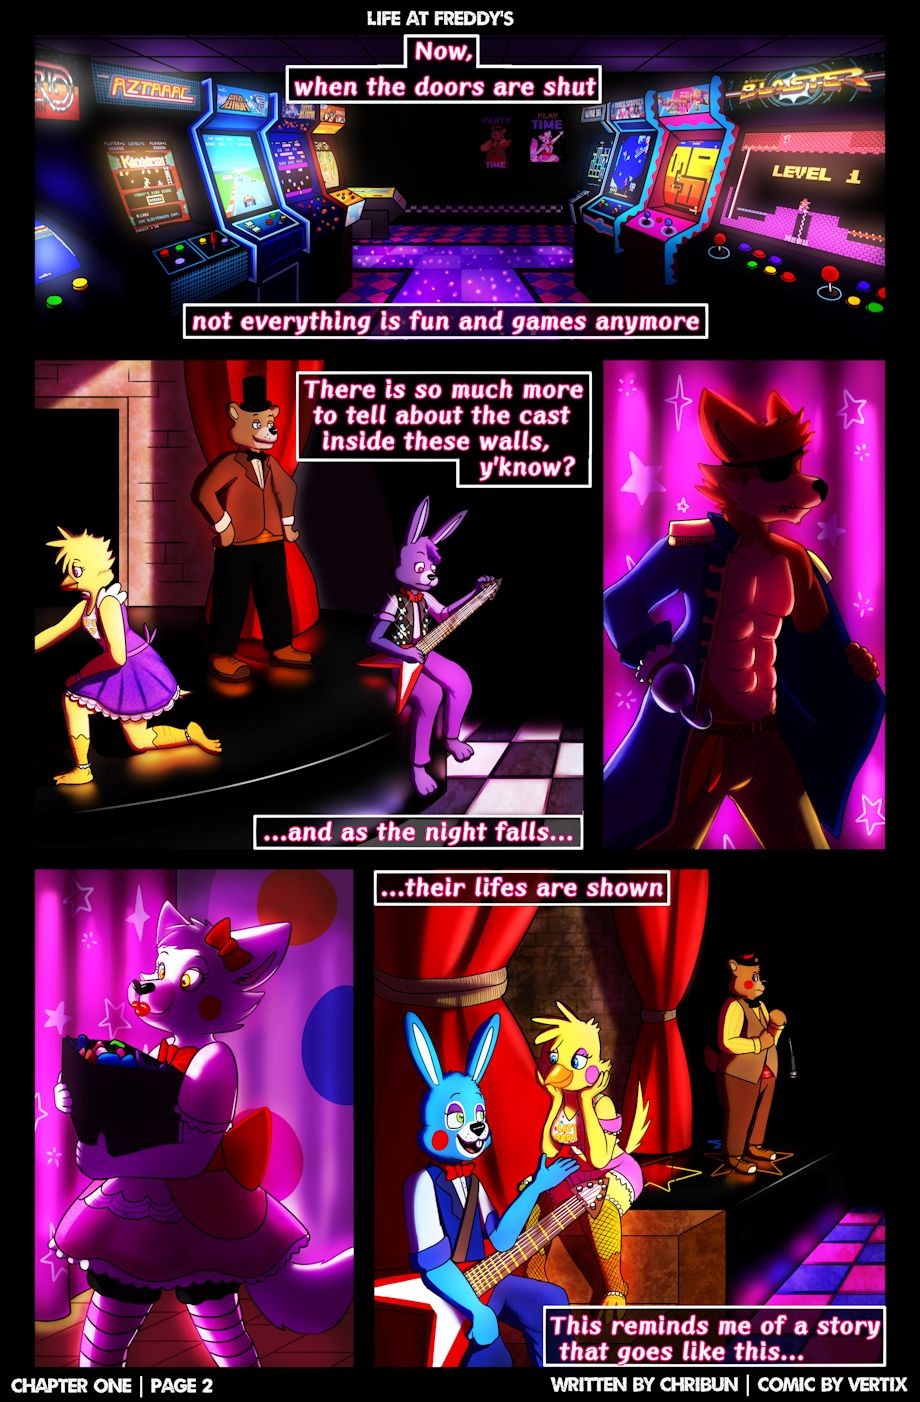 Five Nights At Freddys Life At Freddys Chapter One 04